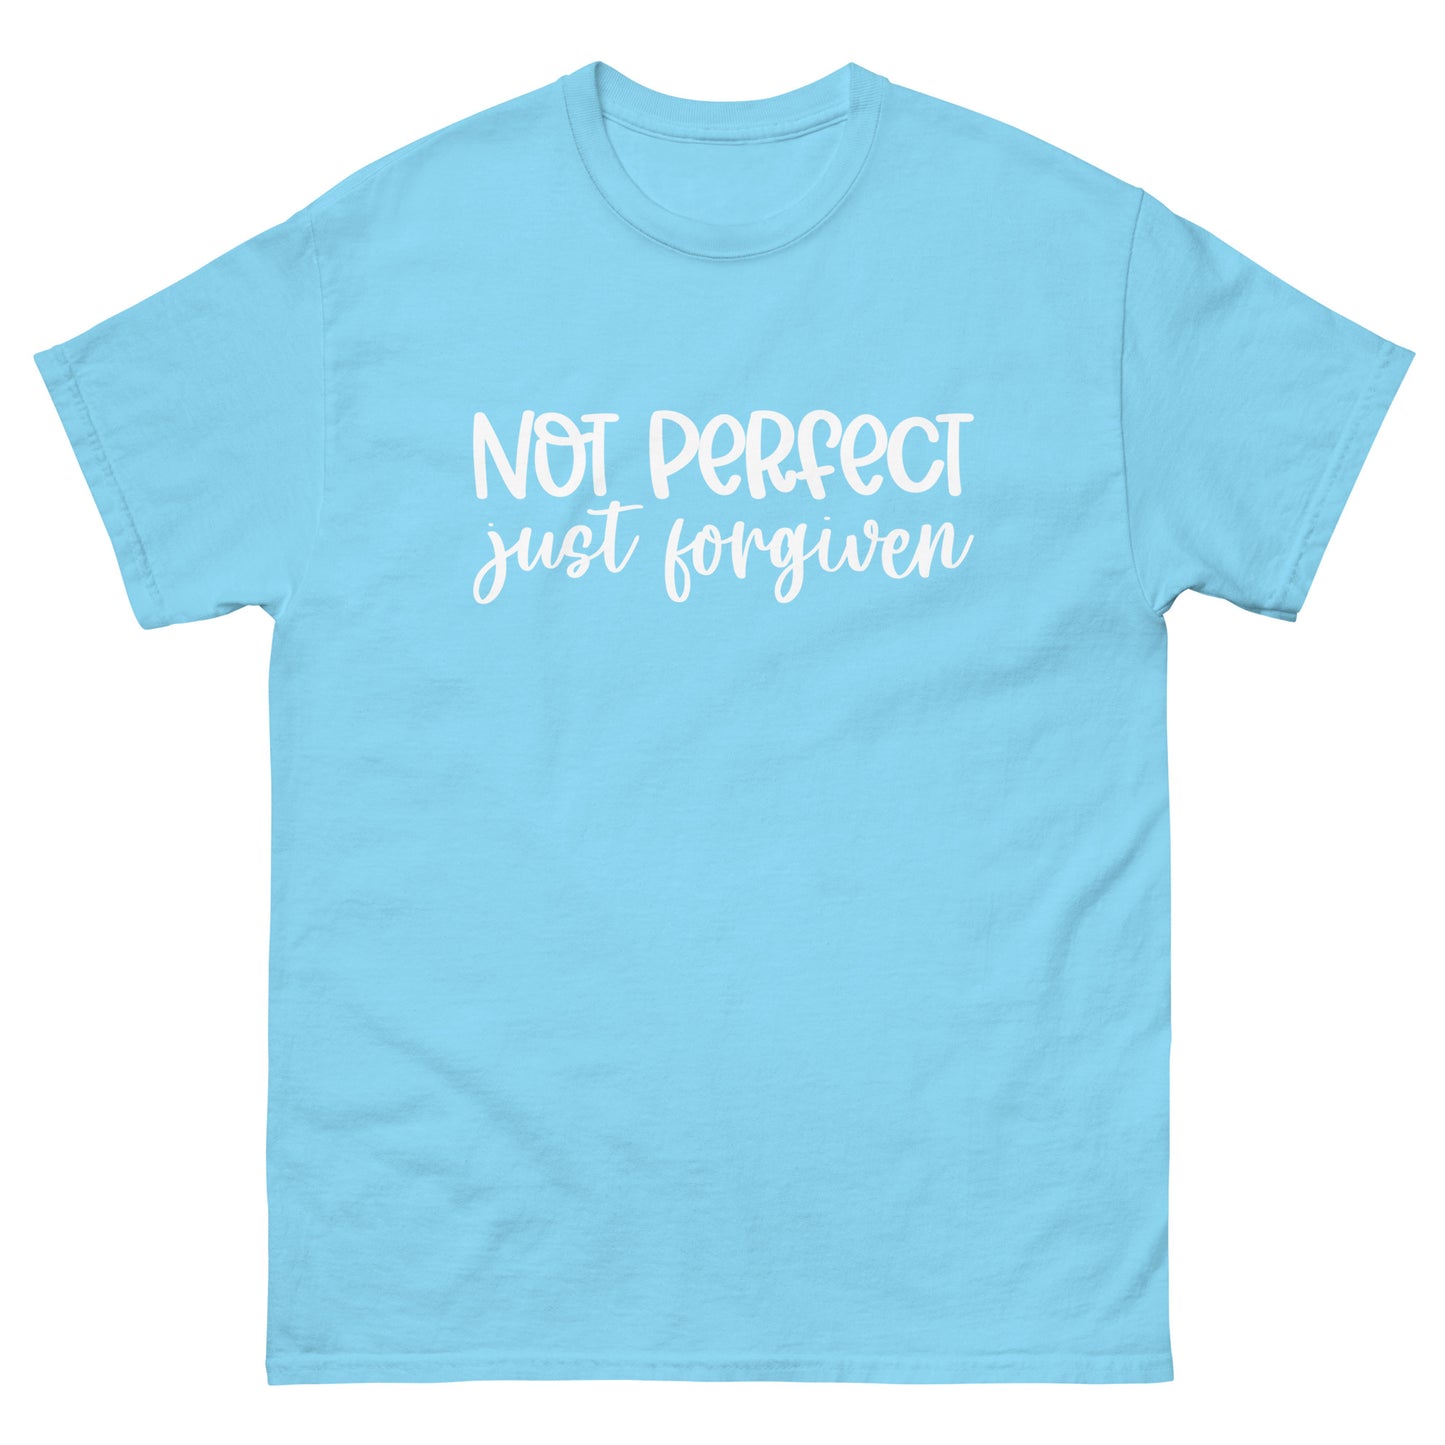 Not Perfect Just Forgiven - classic tee